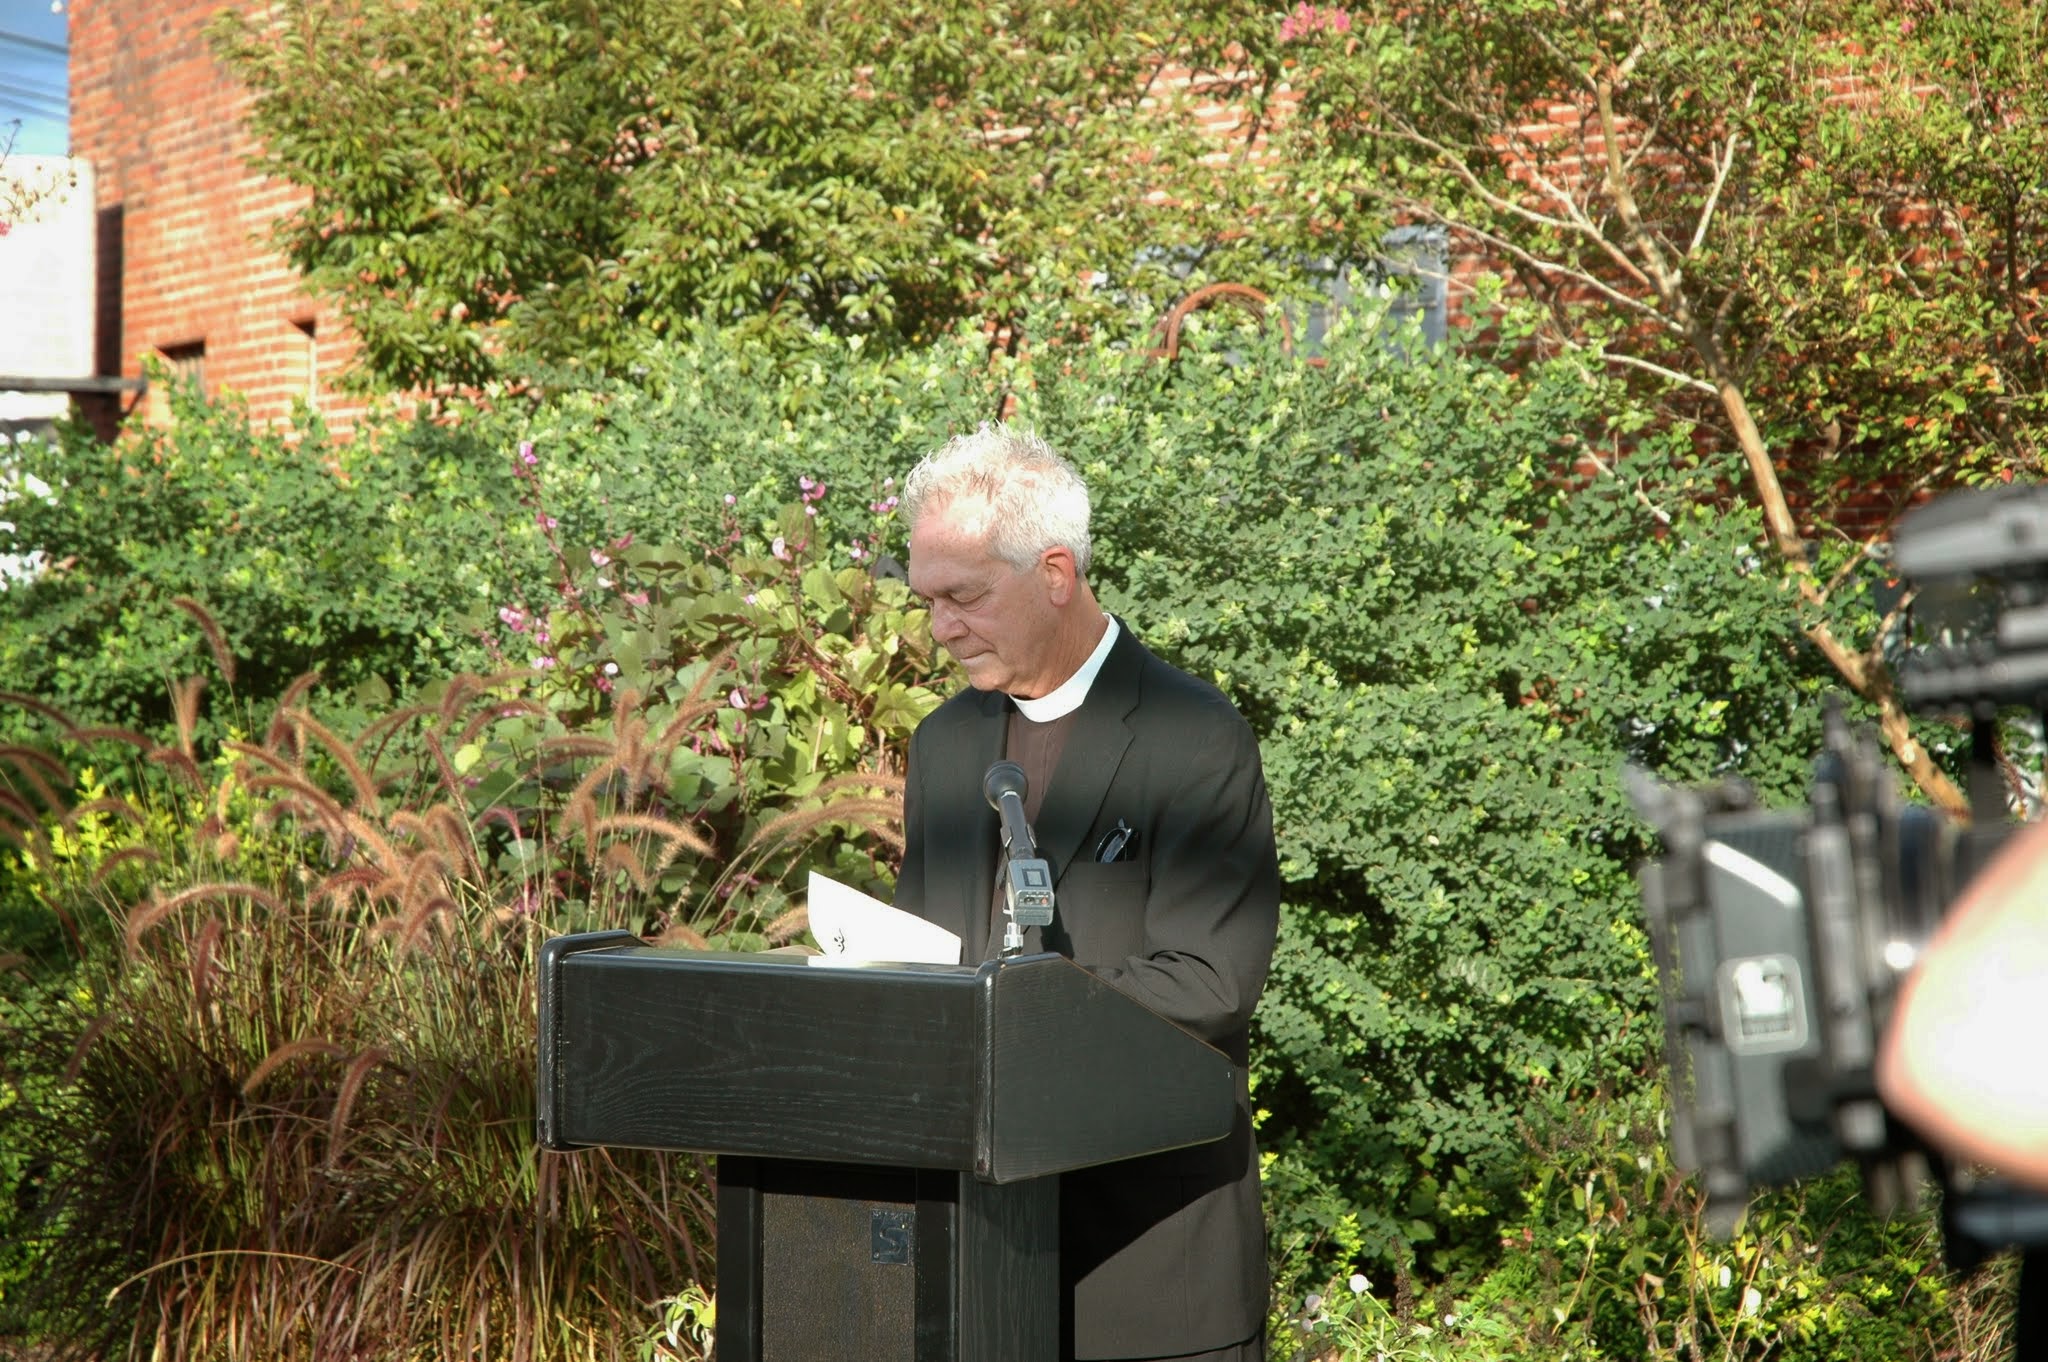 The reverend giving his invocation at the unveiling